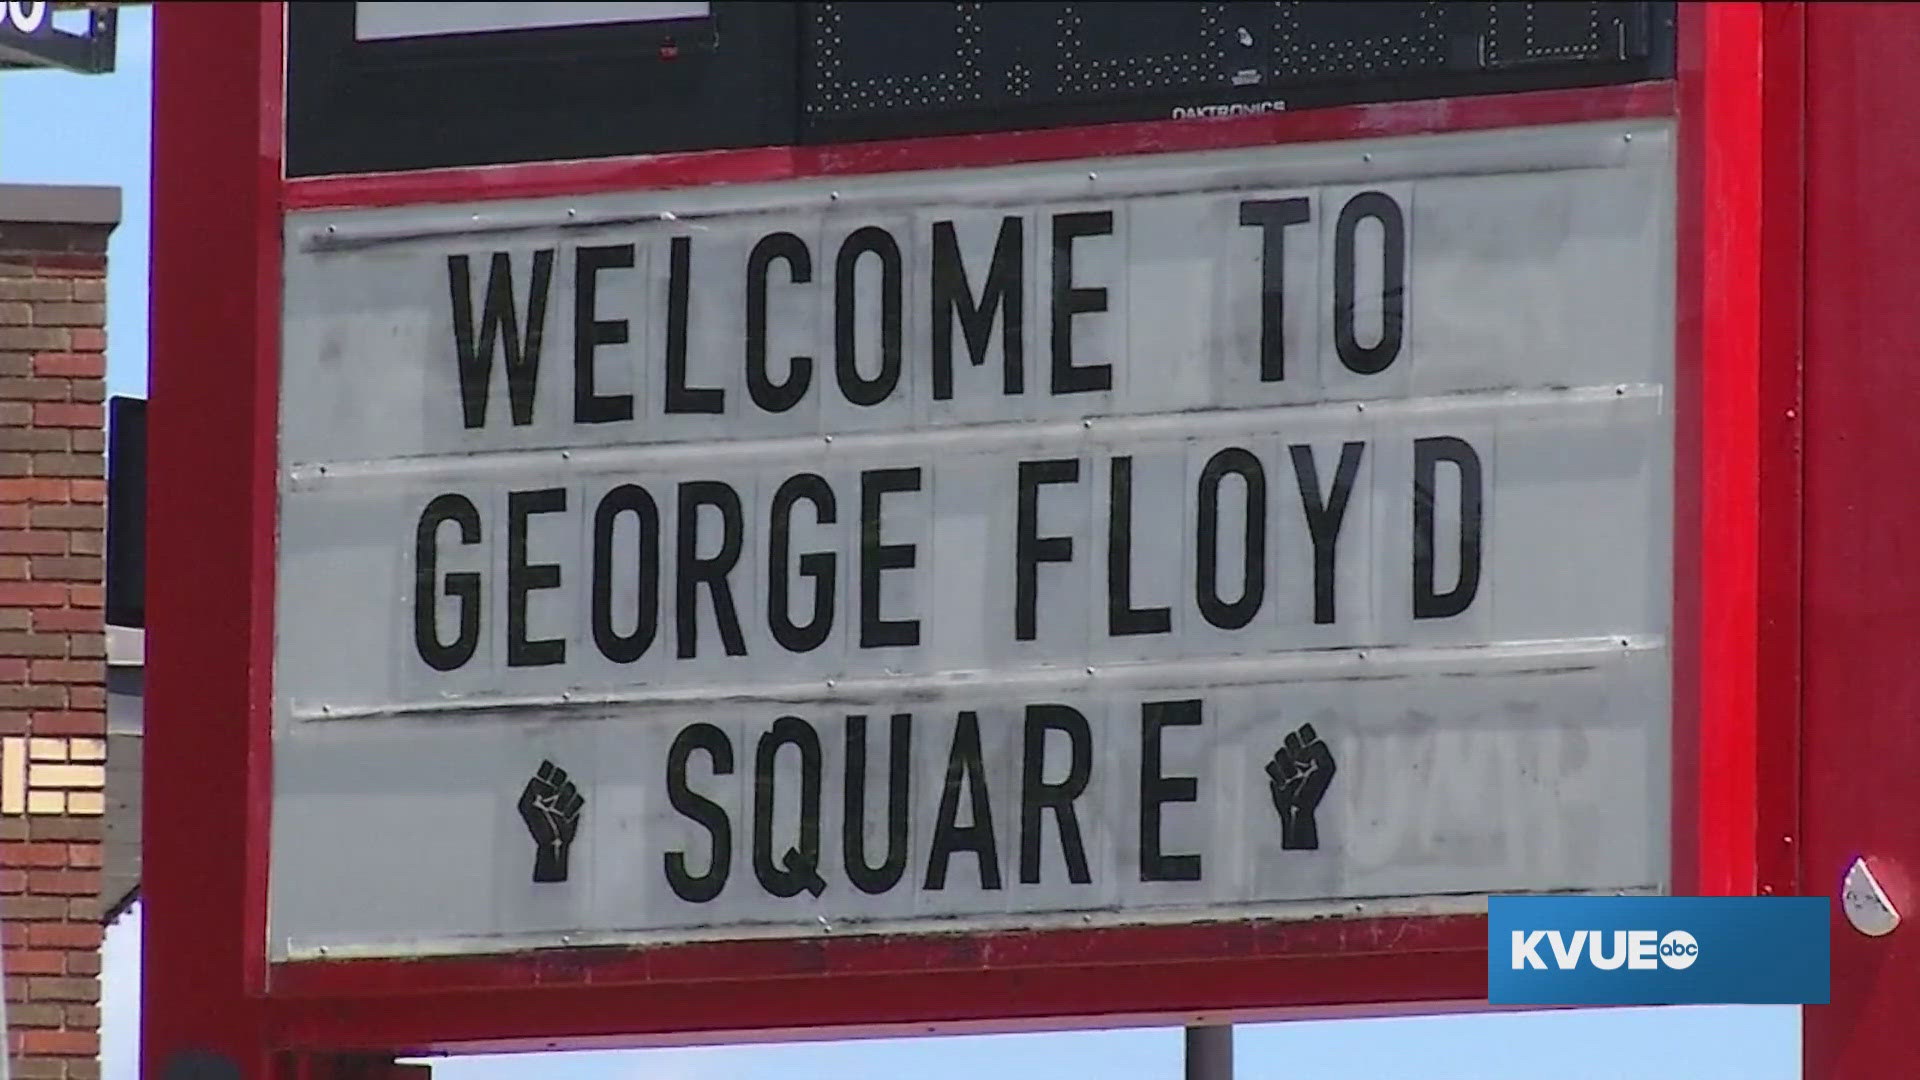 Floyd's death in Minneapolis in 2020 sparked protests nationwide.